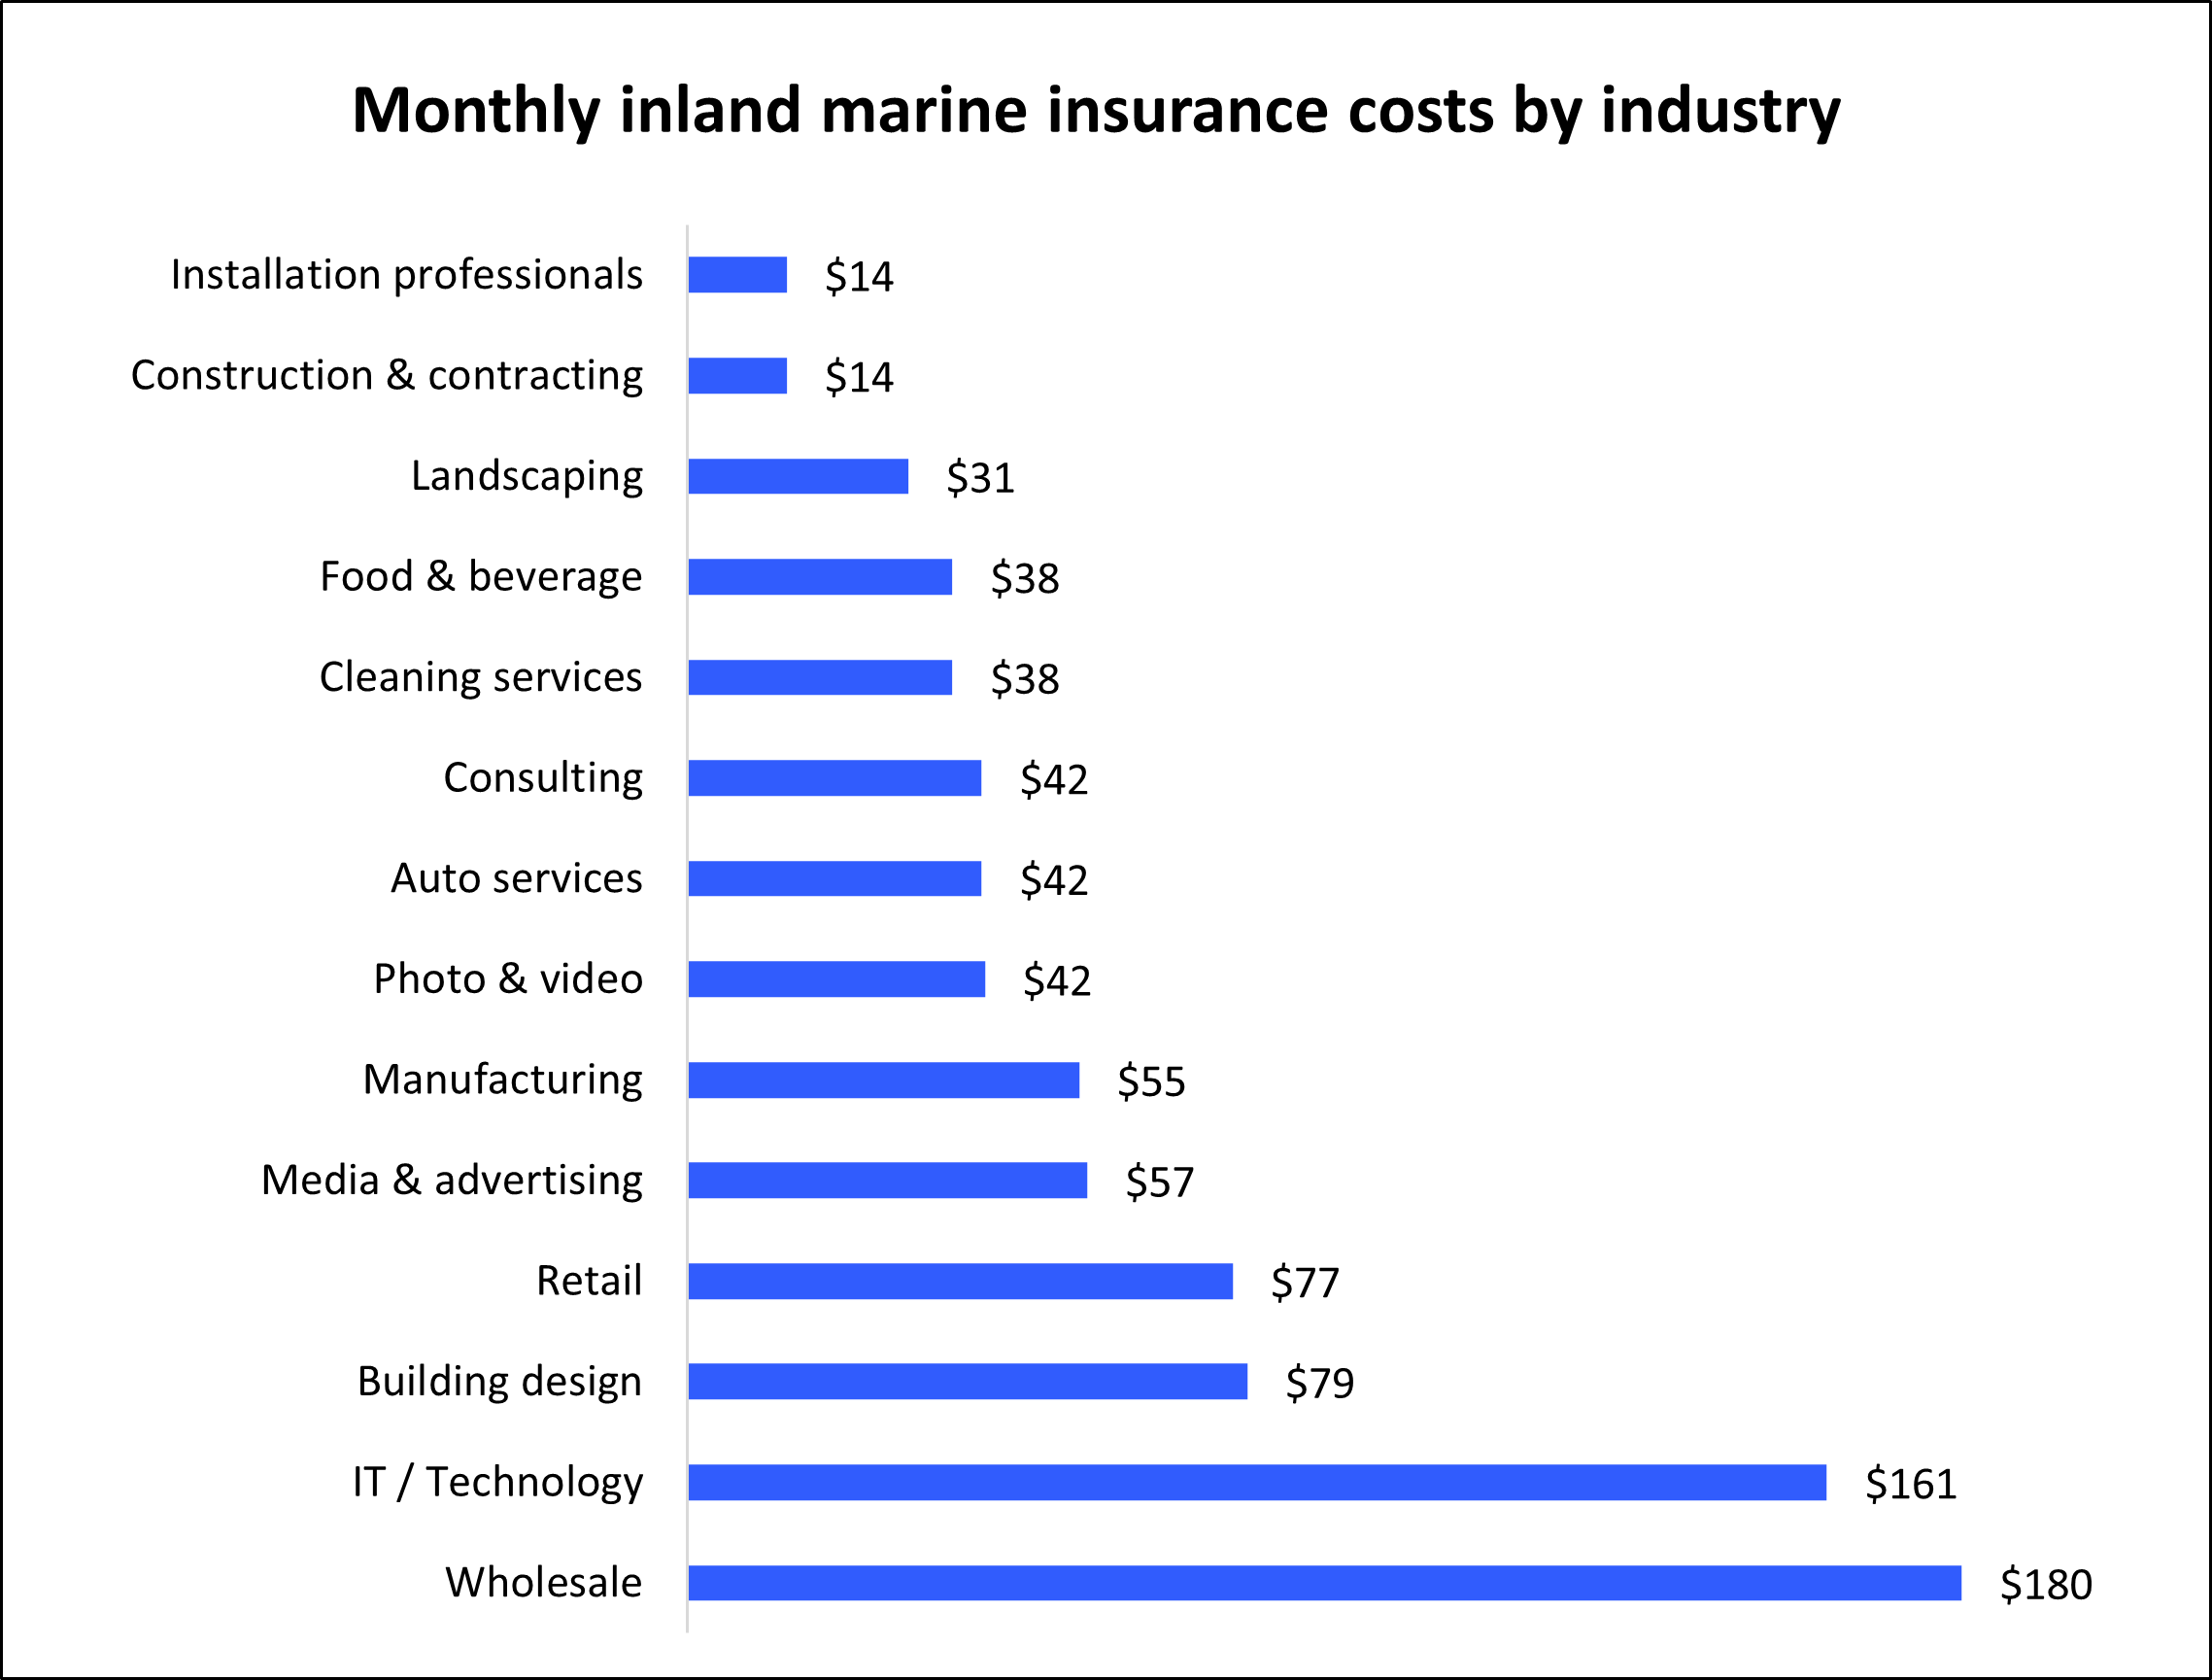 Average monthly cost of inland marine insurance by industry.